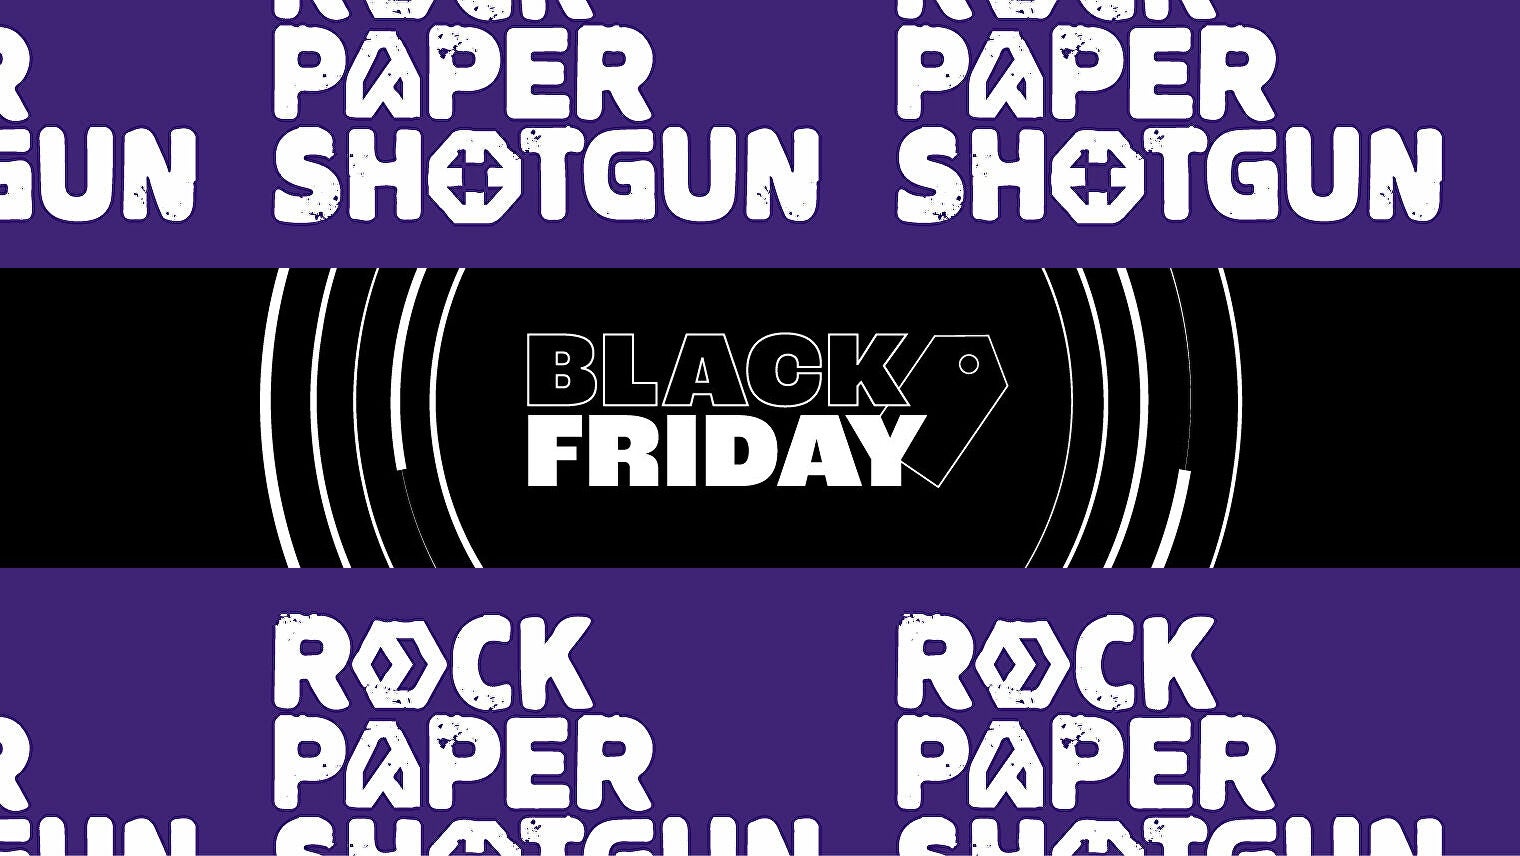 The RPS logo on a purple background with a Black Friday banner in the centre